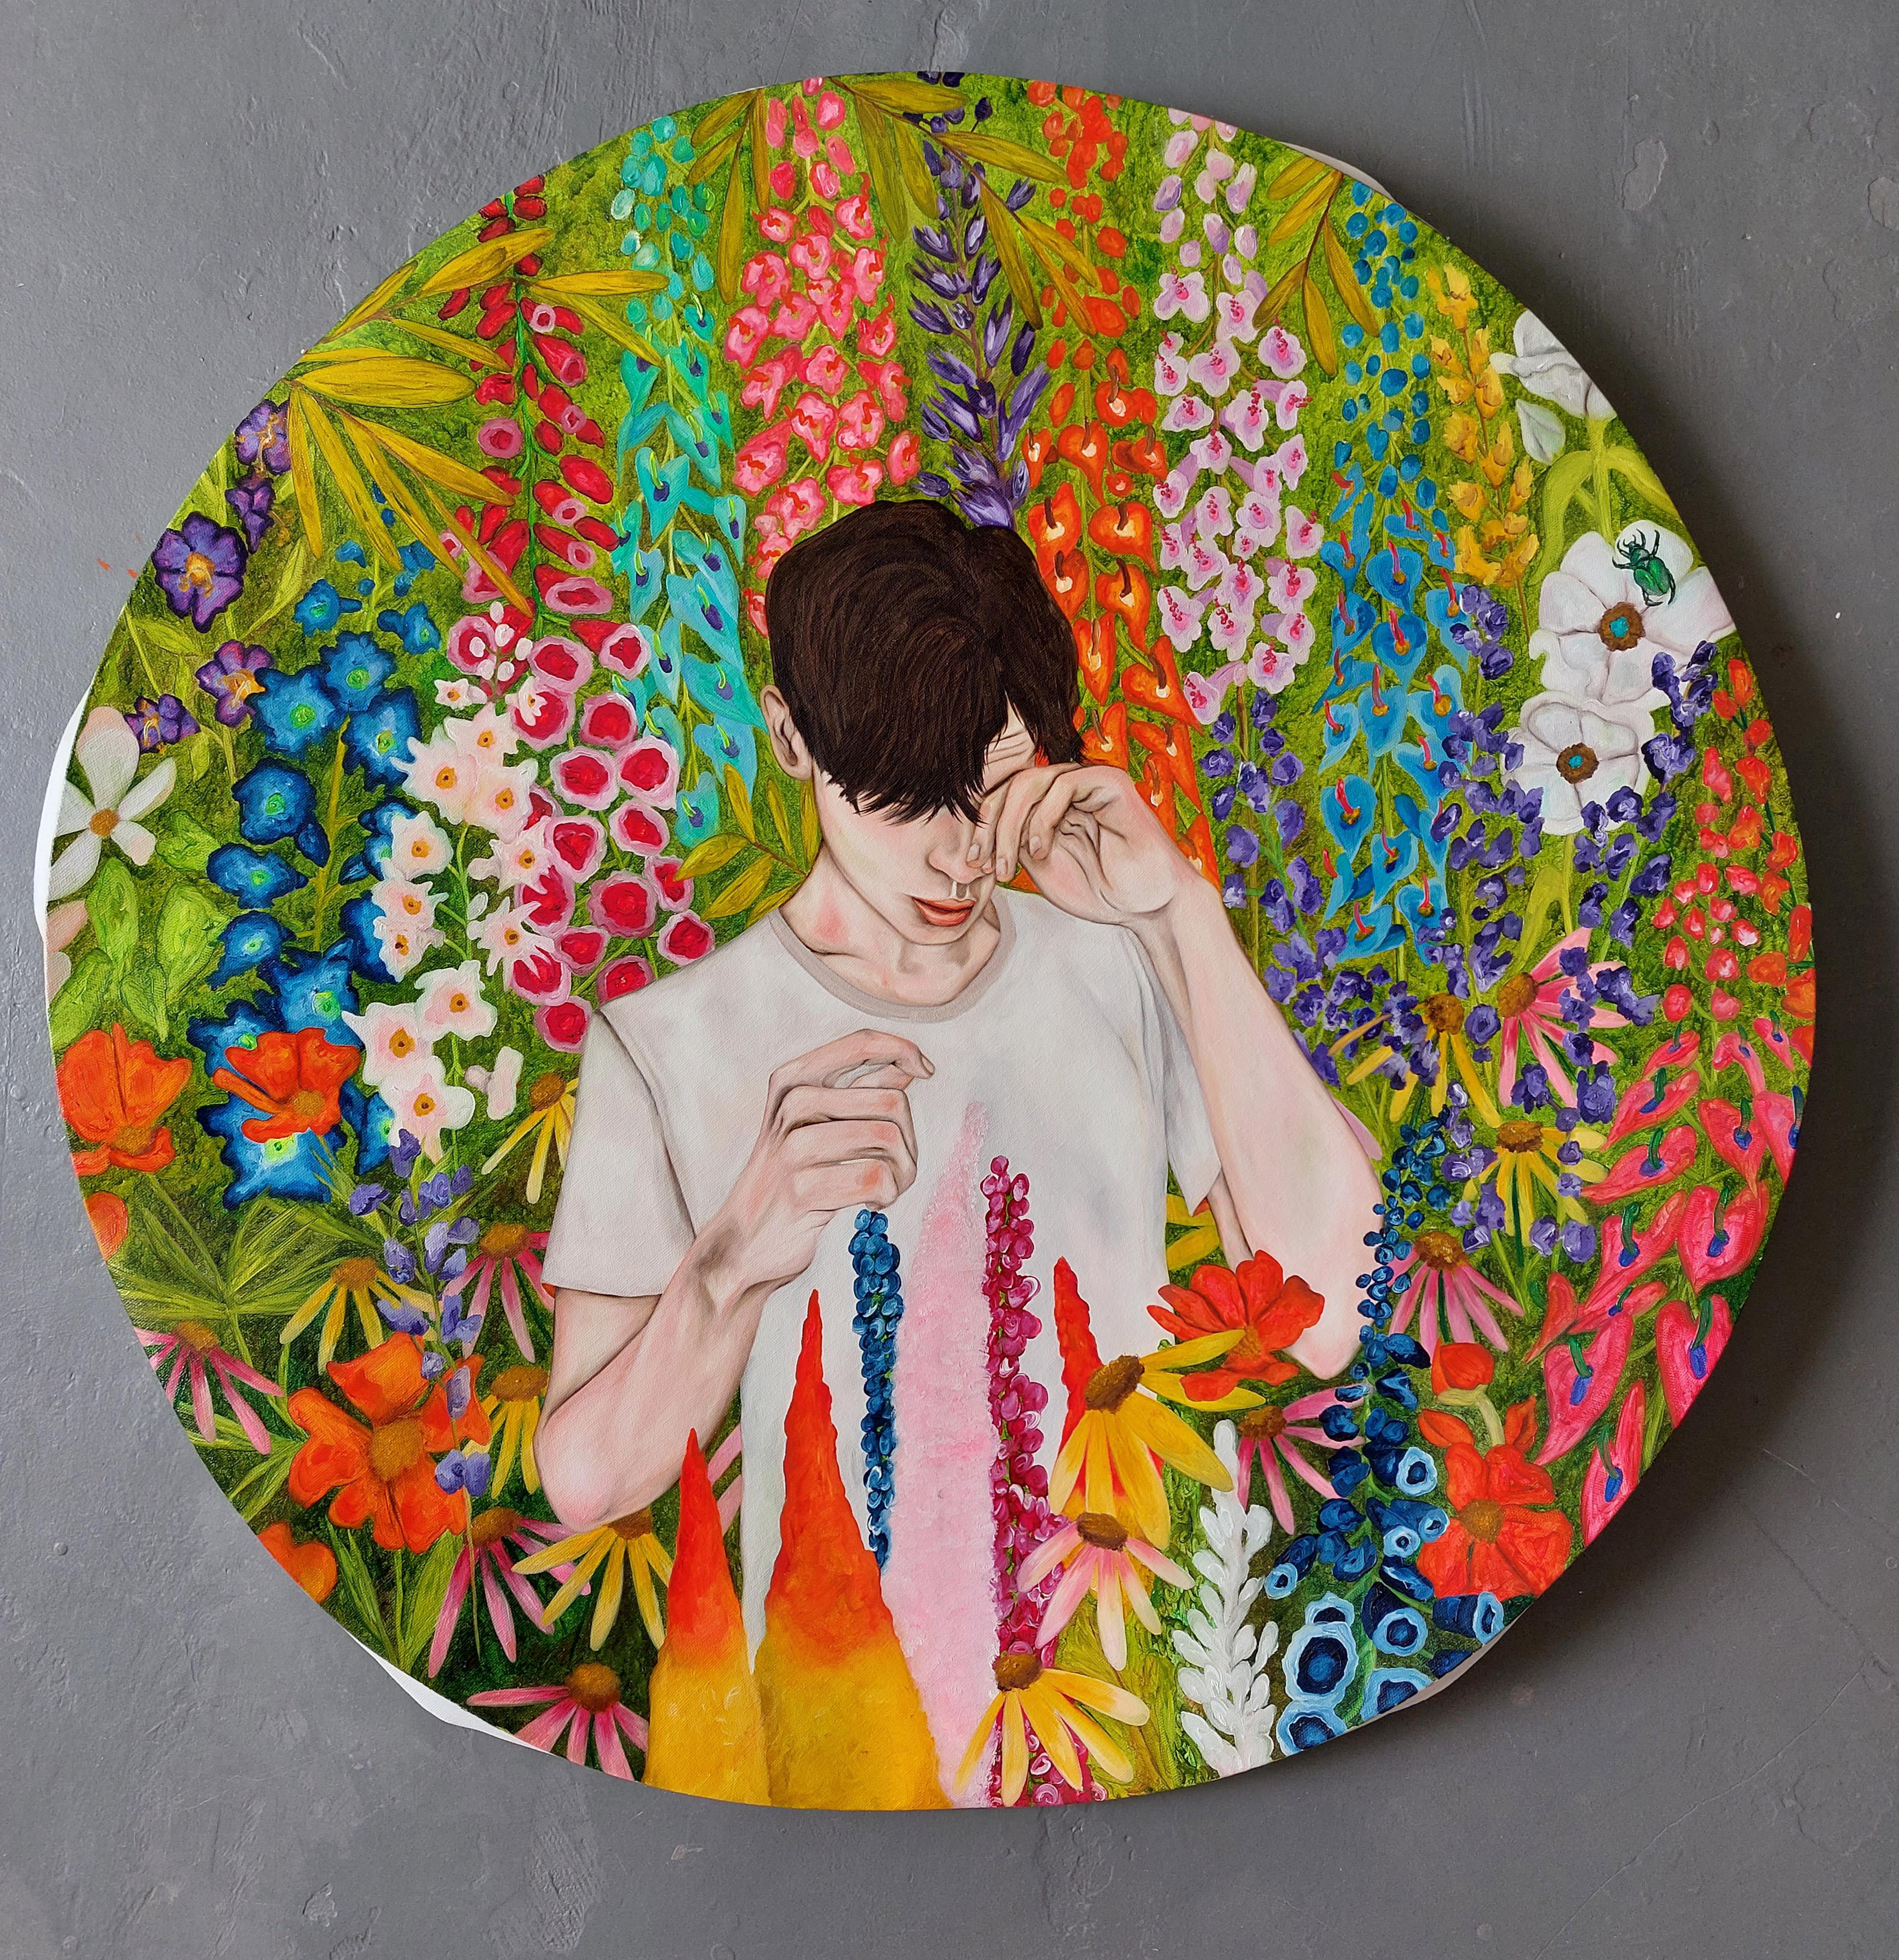 The Boy With Pollen Allergy, 2022 by Ramonn Vieitez
Oil on cotton canvas
Size: 80cm DM
Unique
Signed on the back by the artist
Mounted on a stretcher
Weight: 2,5 kg

___

Ramonn Vieitez is a self-taught Brazilian artist who primarily utilizes